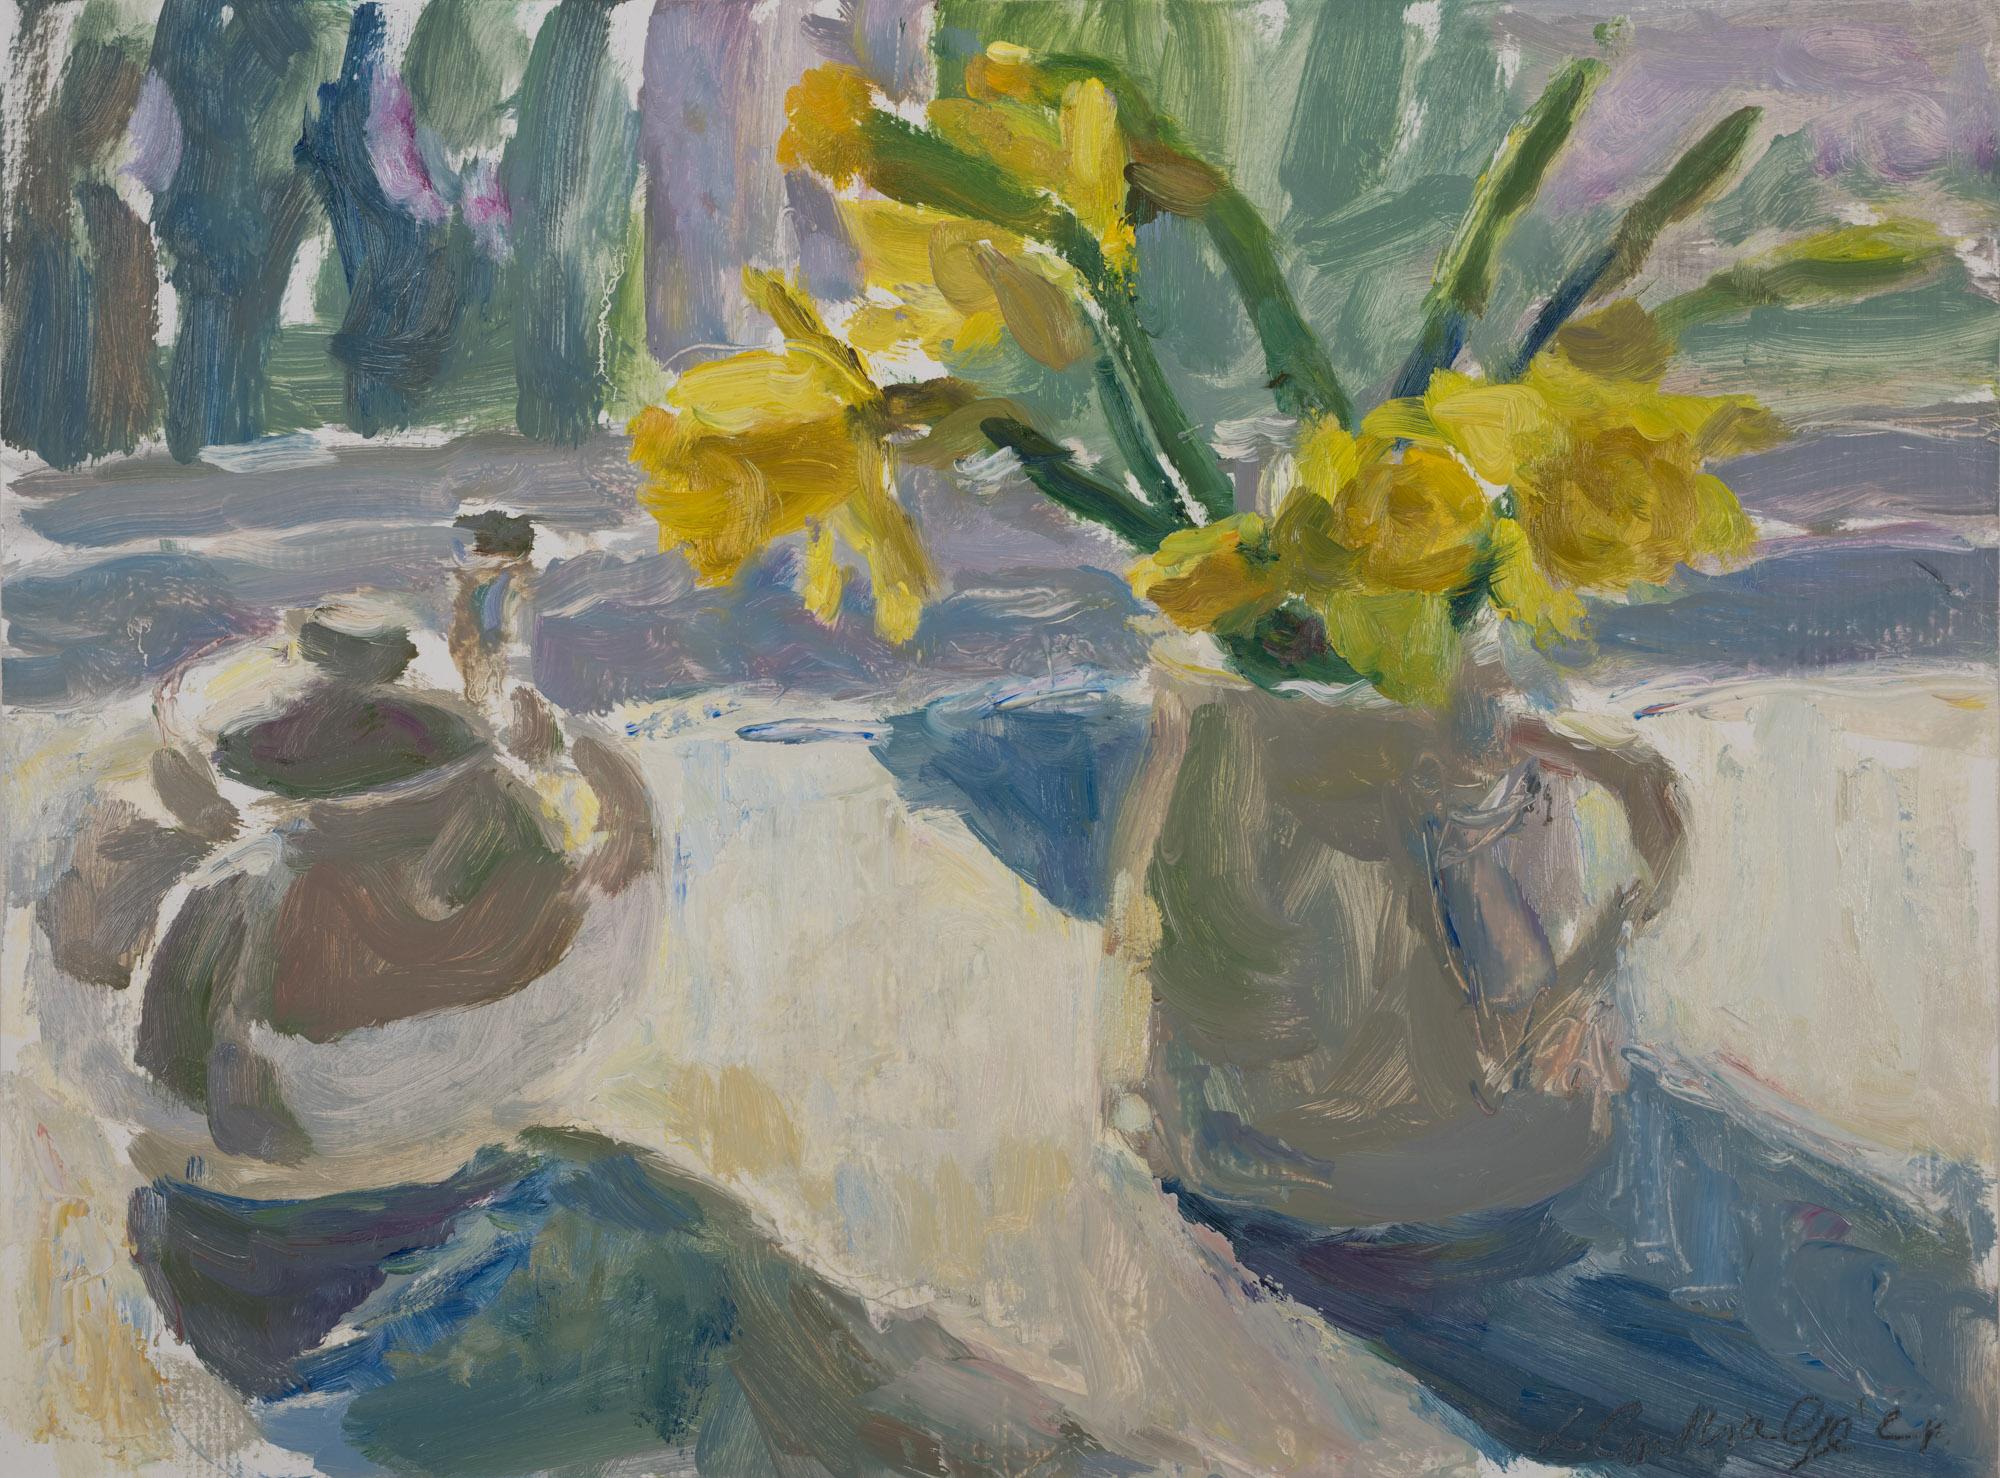 Teapot and Daffodils in Sunlight